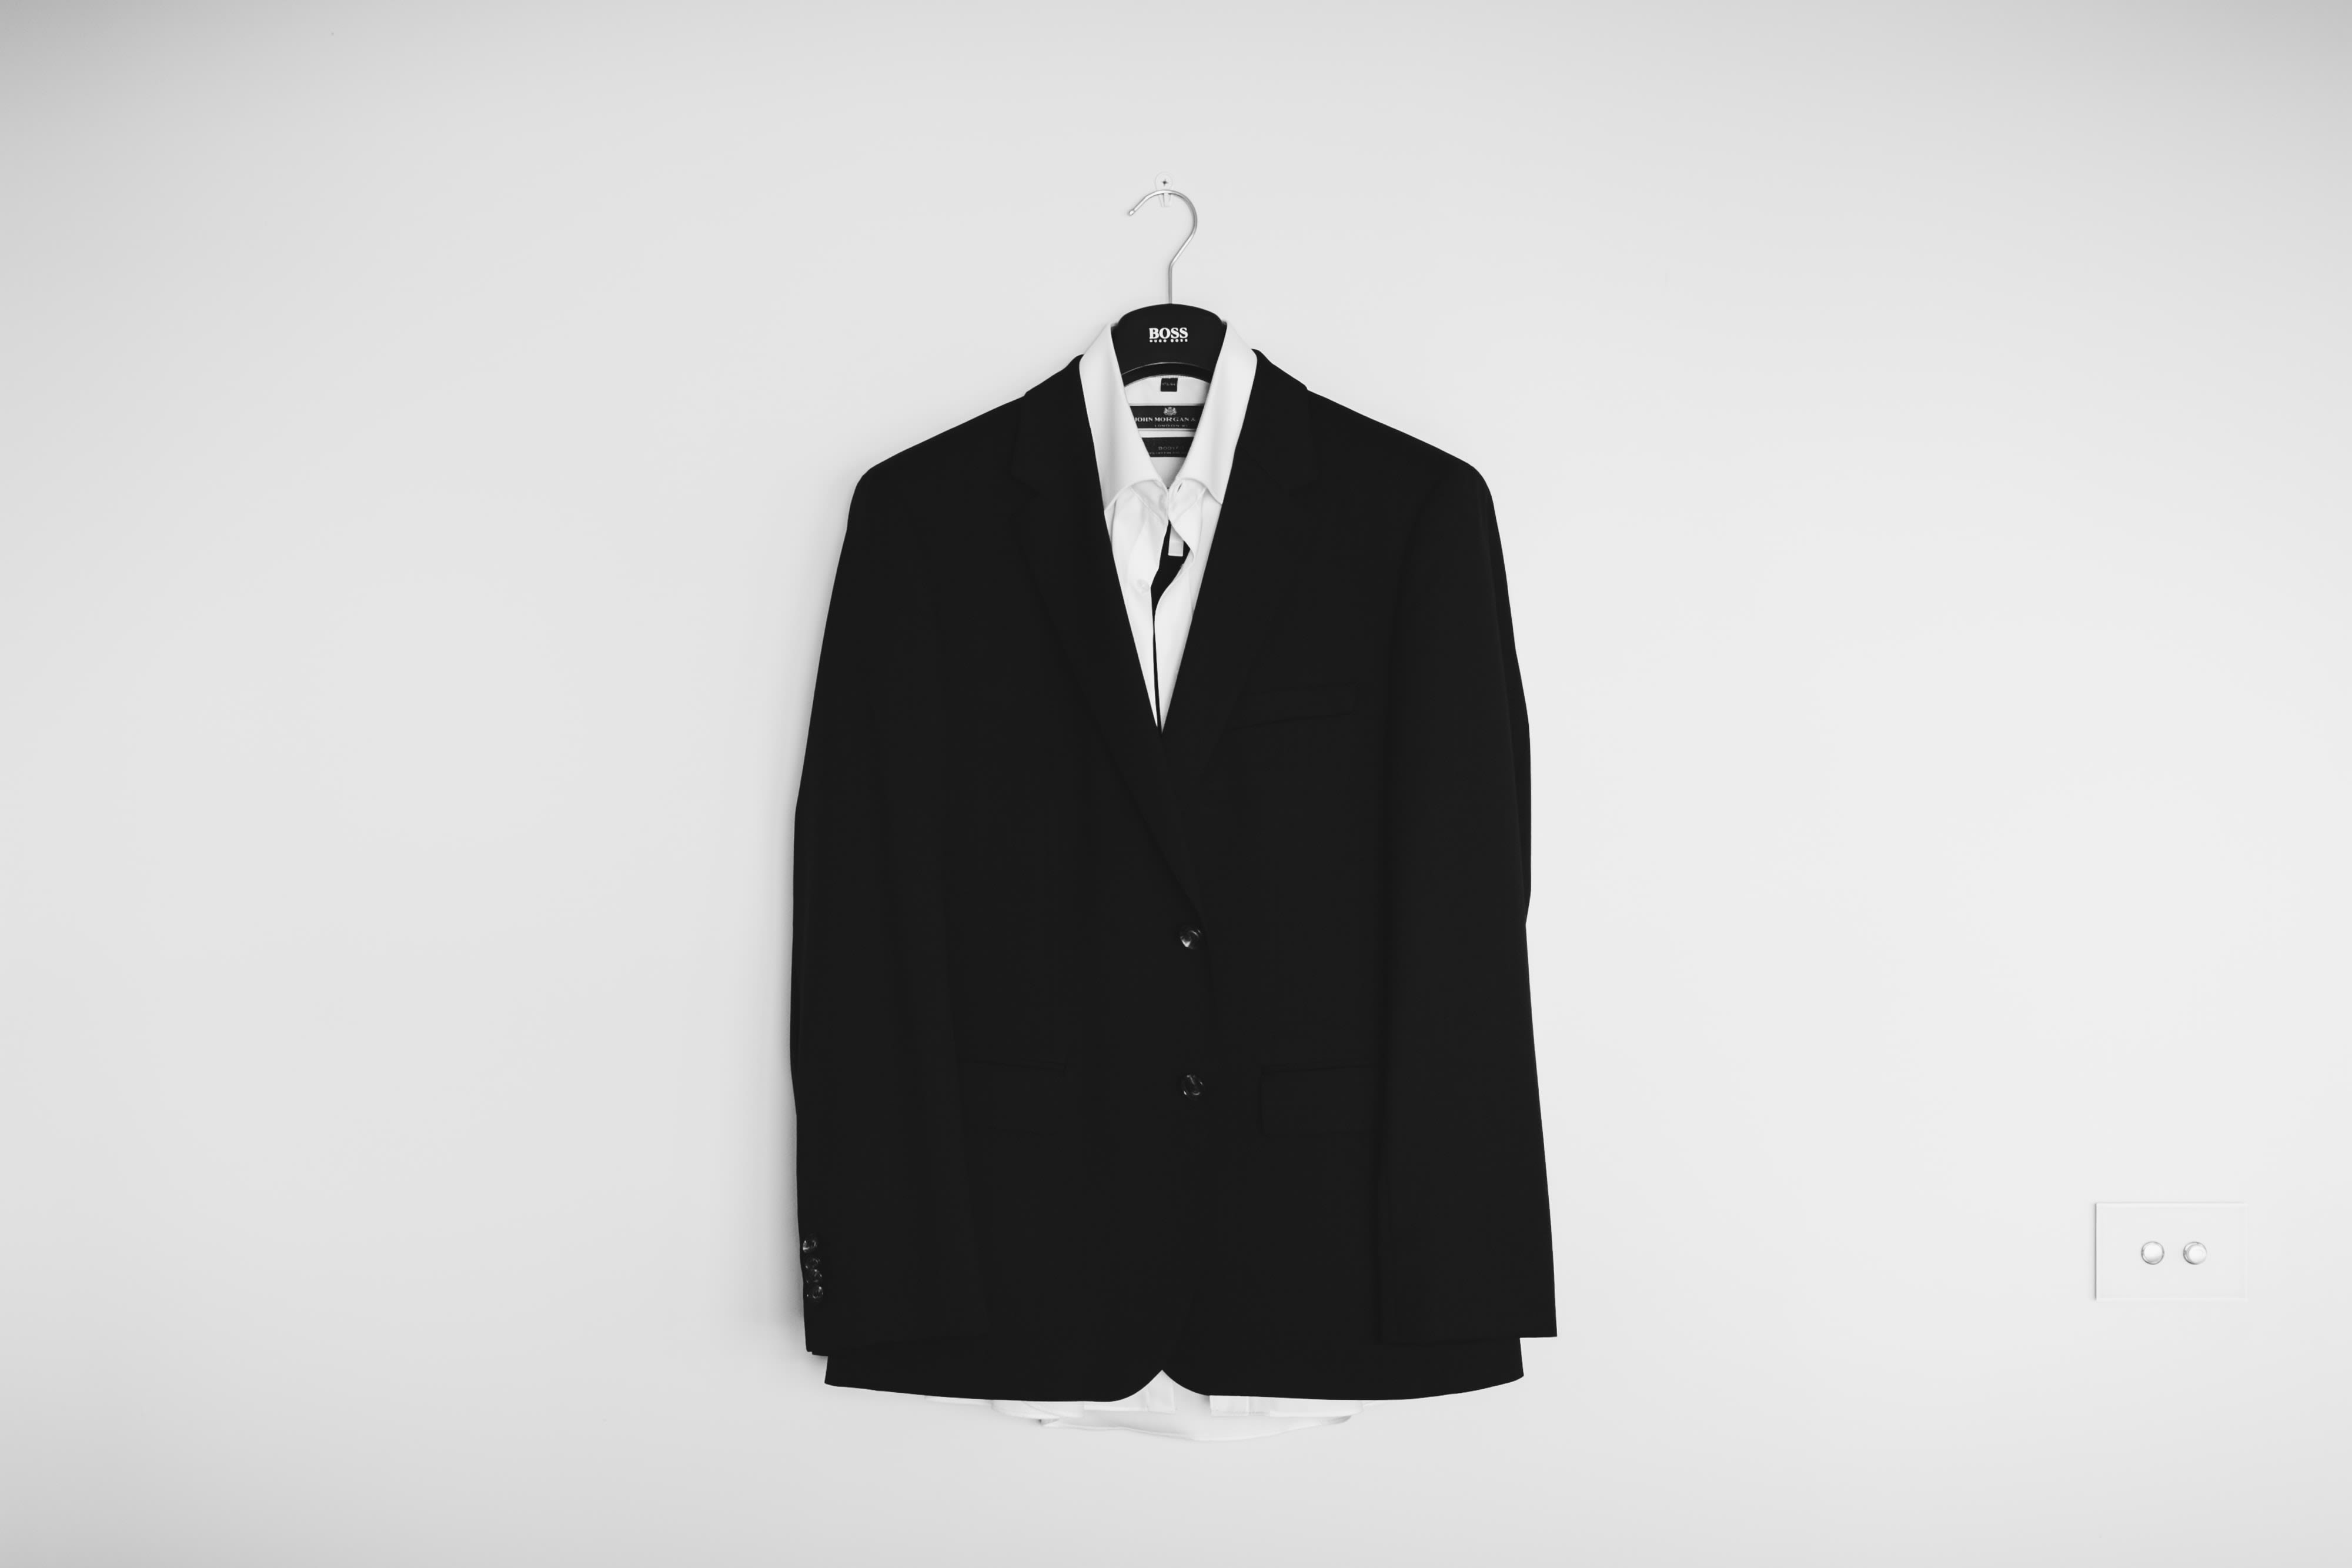 Suit jacket and shirt hanging up on a wall 